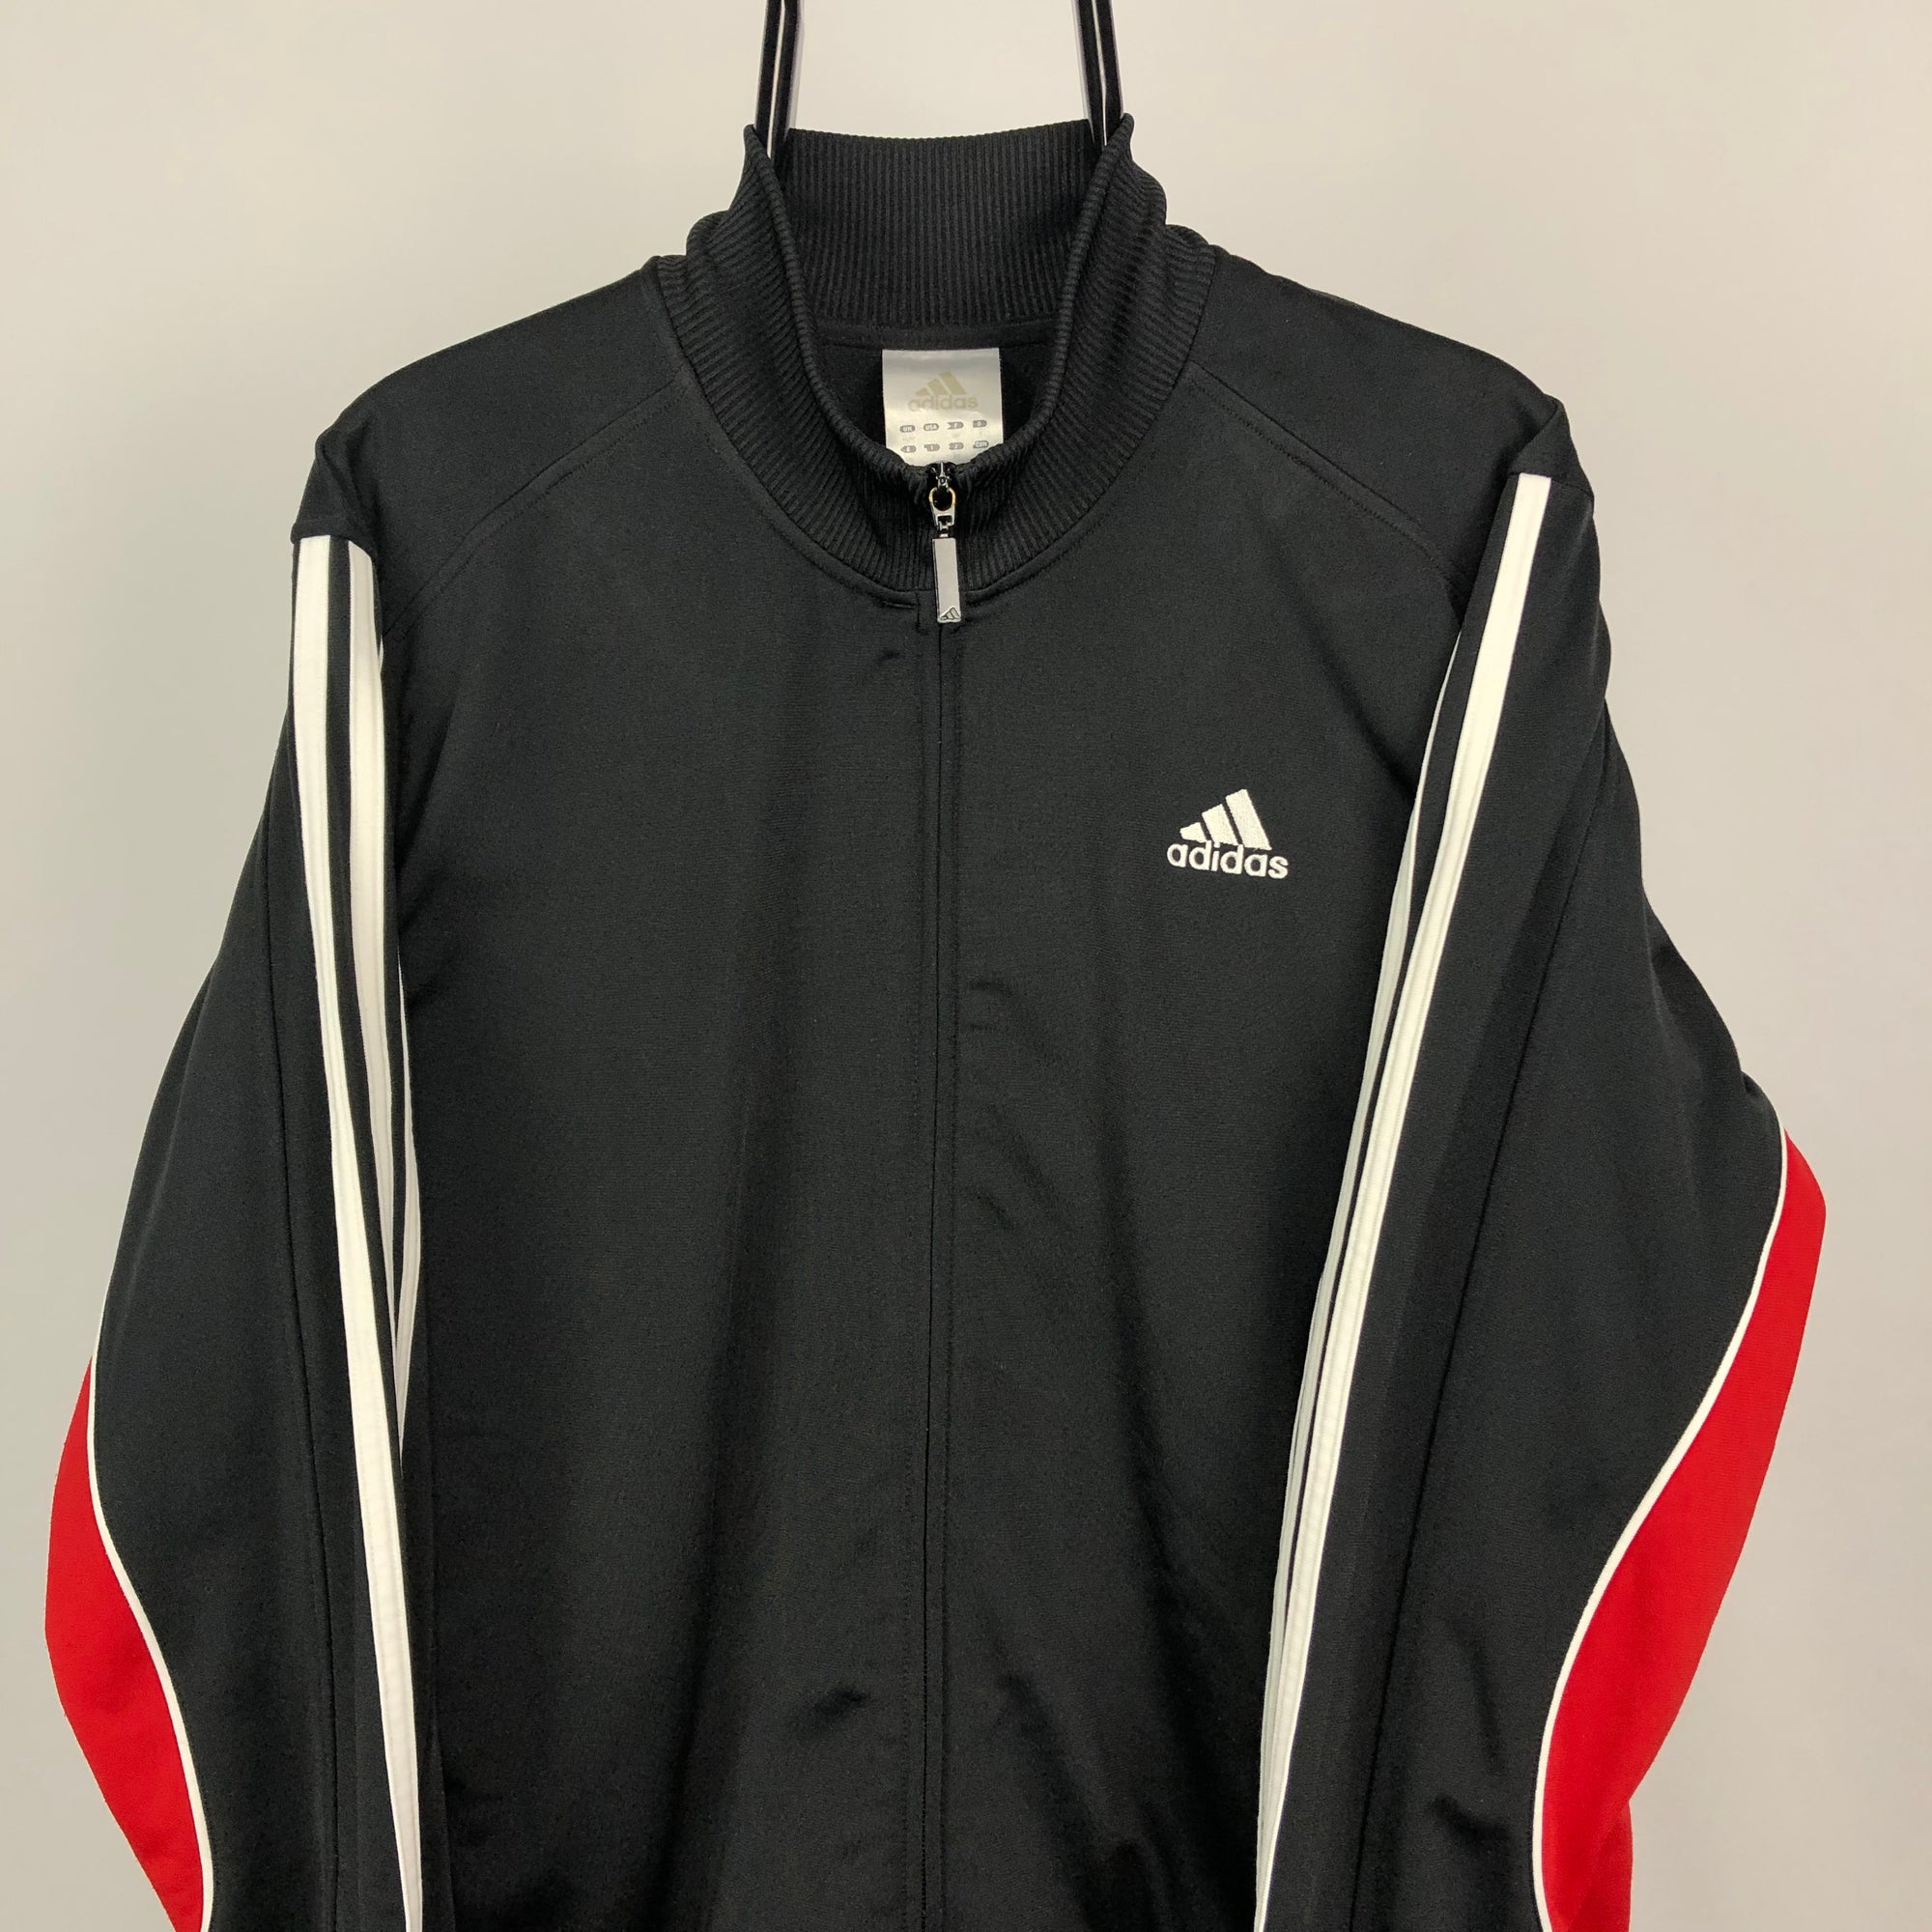 Adidas Track Jacket in Black/Red/White - Men's Large/Women's XL